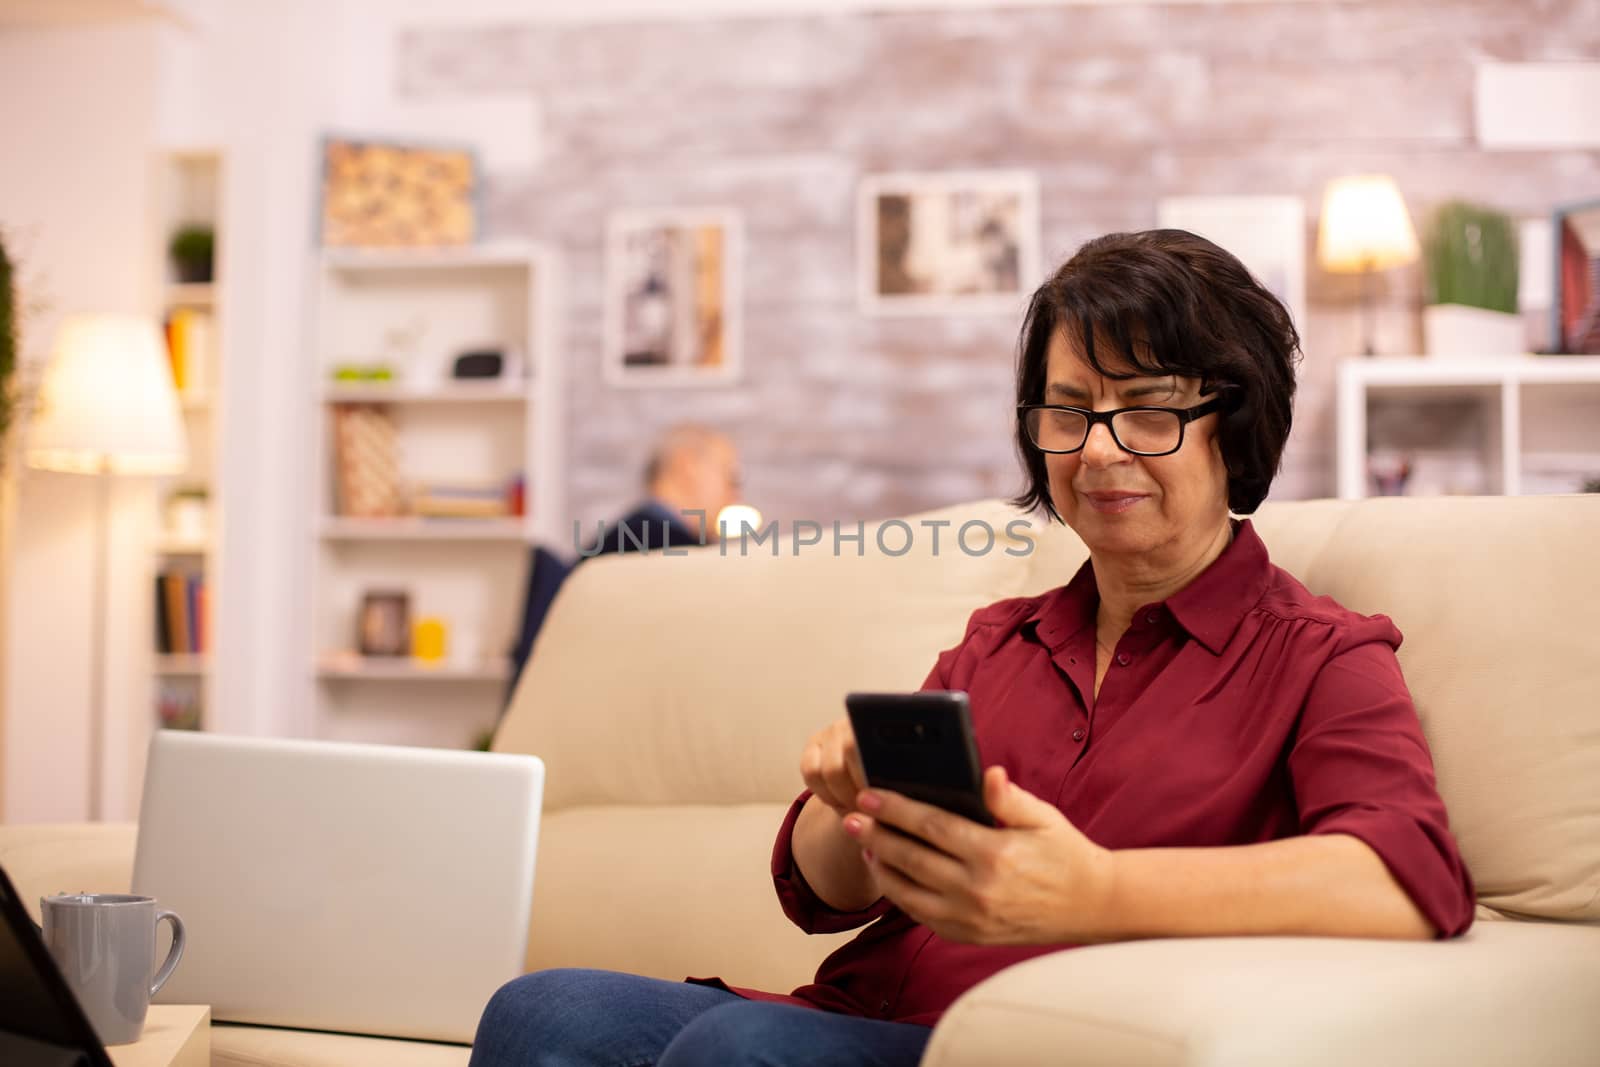 Elderly lady using modern technology in her house. She has a modern smartphone in her hands